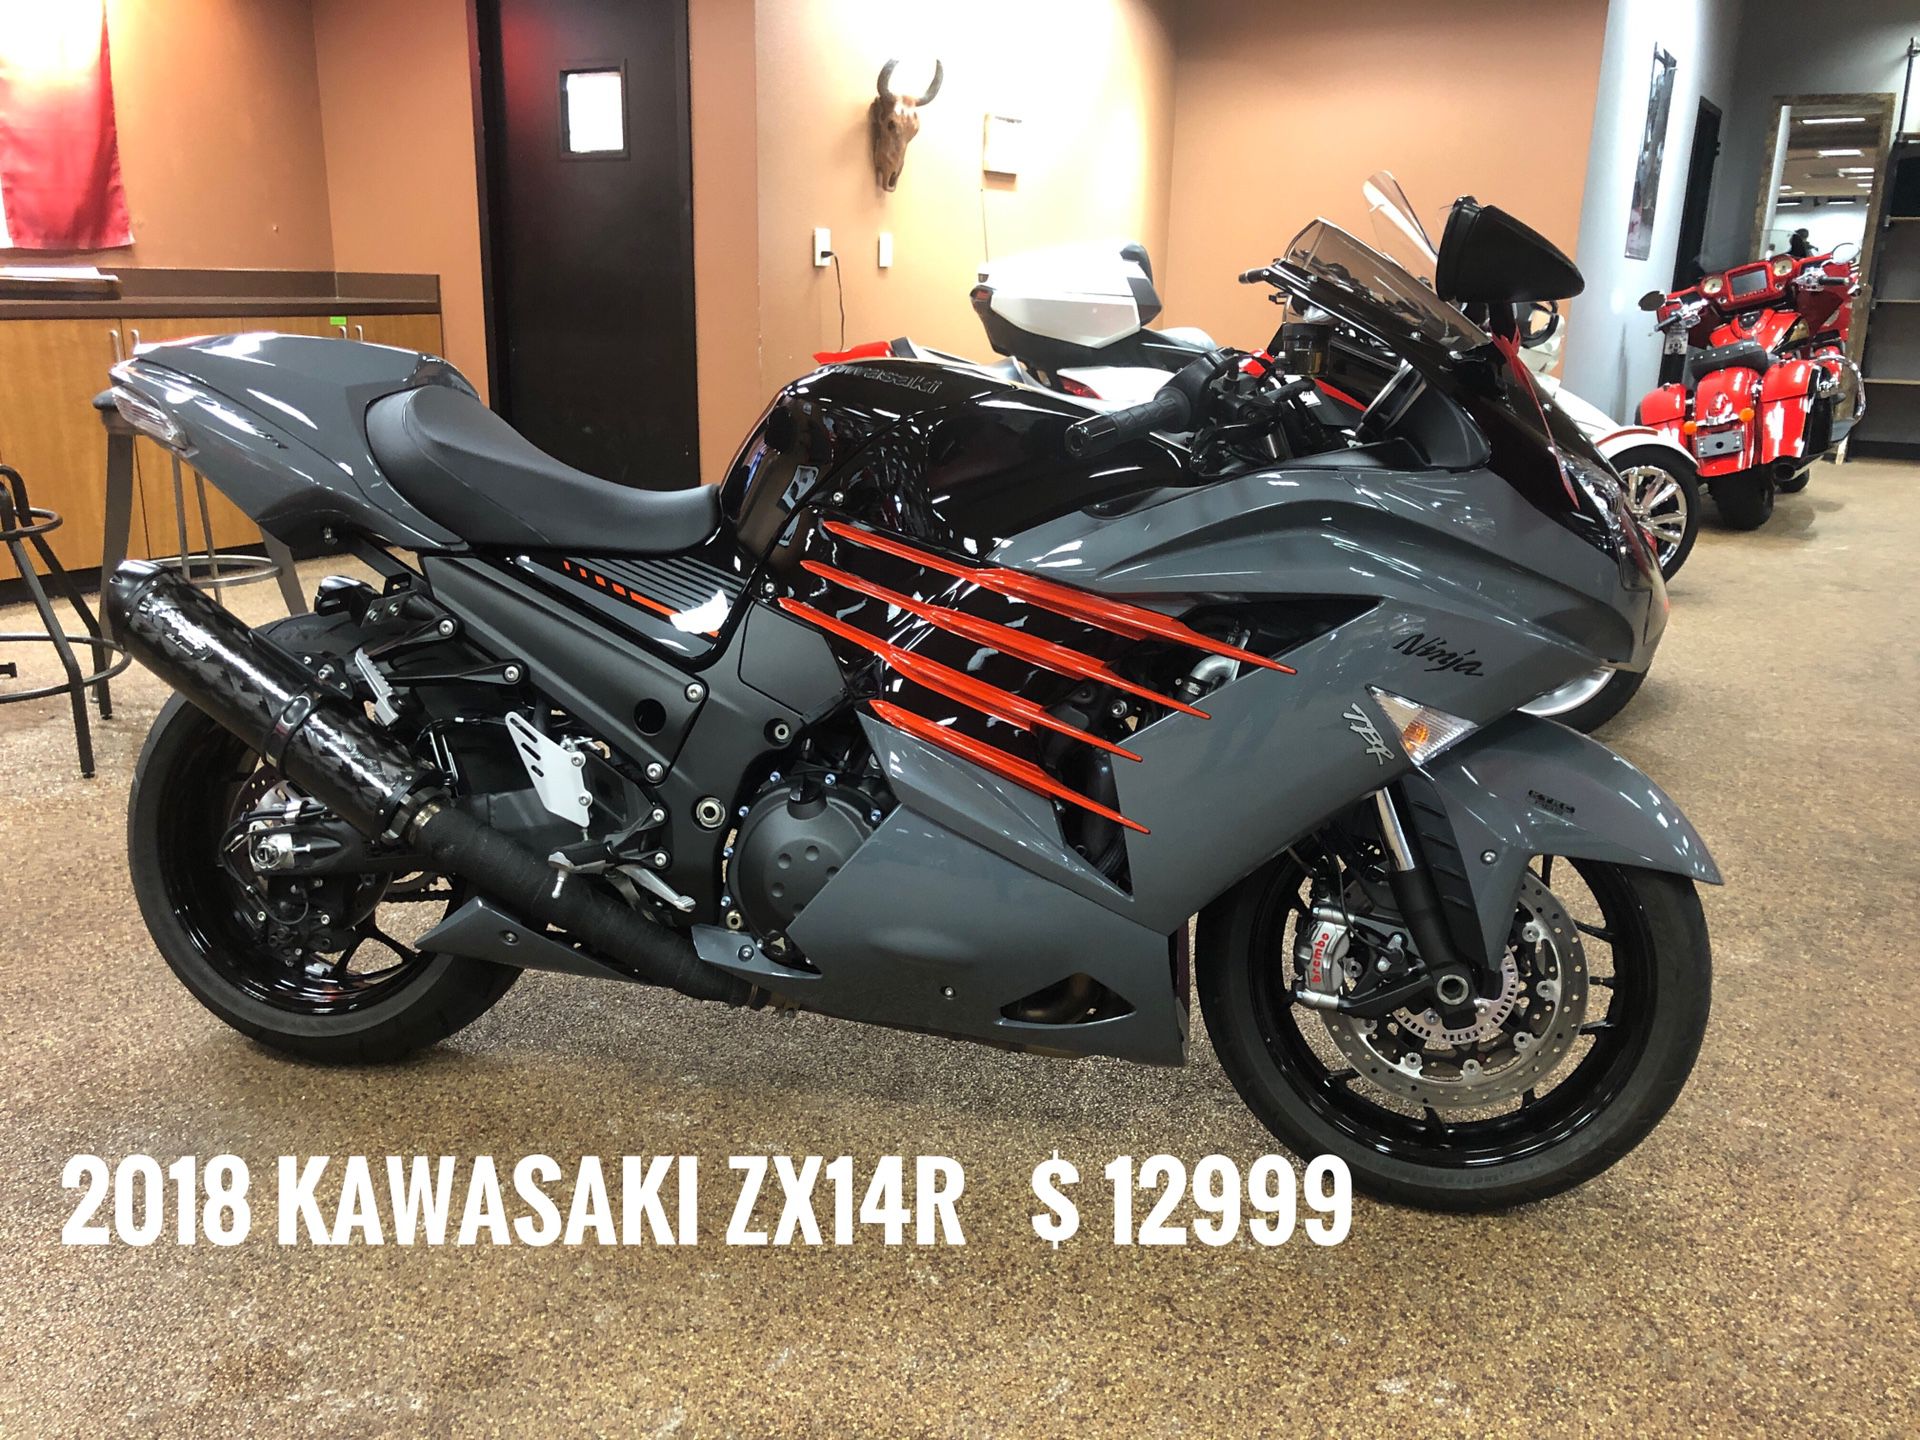 2018 Kawasaki ZX-14R with only 879 miles “WOW”